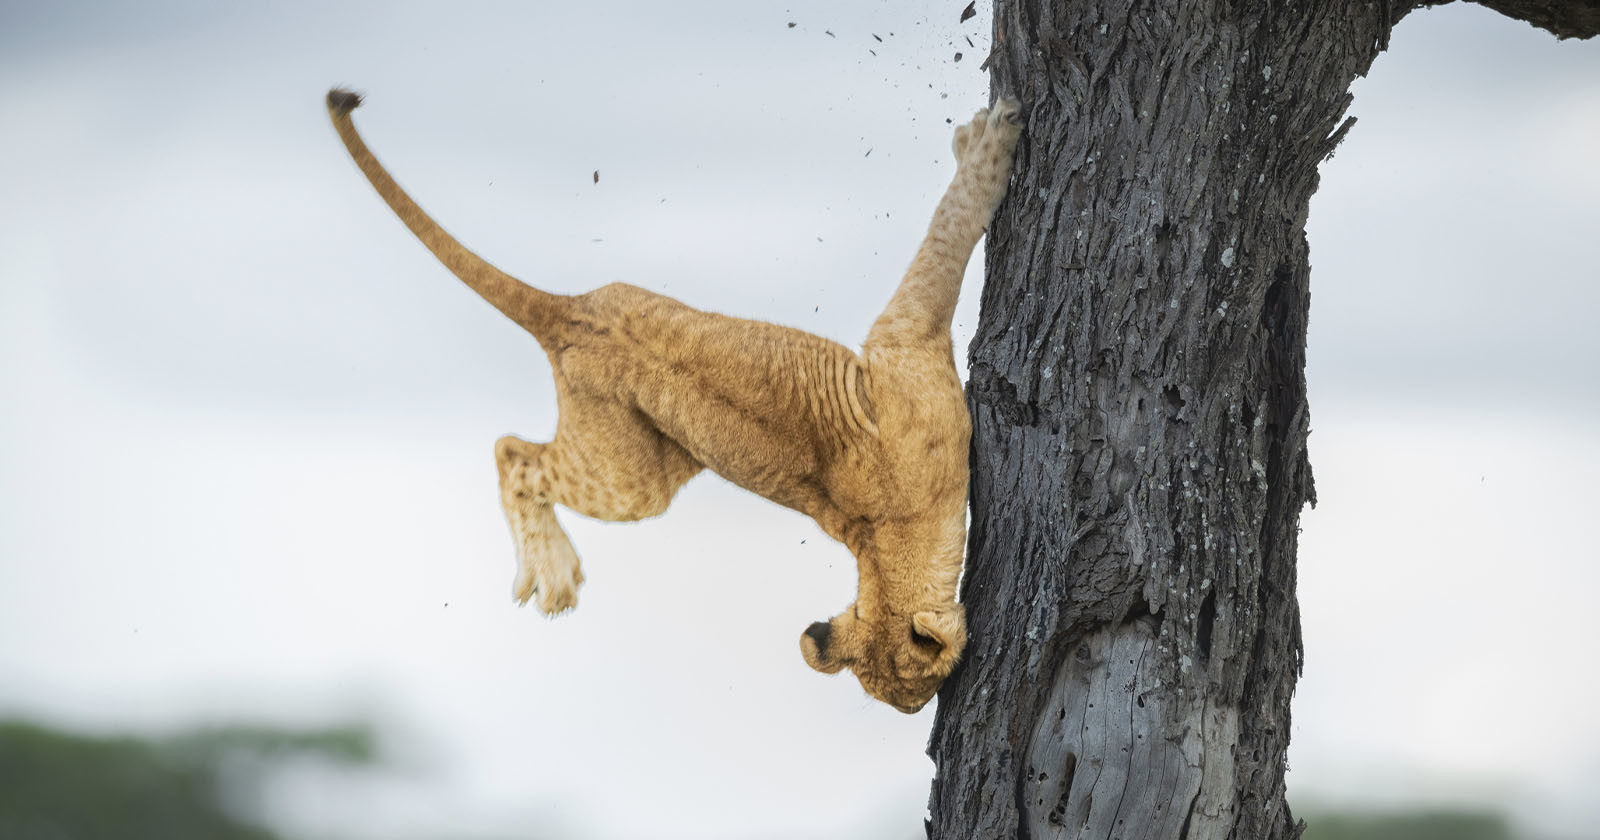 Clumsy Lion Cubs Tree Mishap Wins Comedy Wildlife Photo Awards